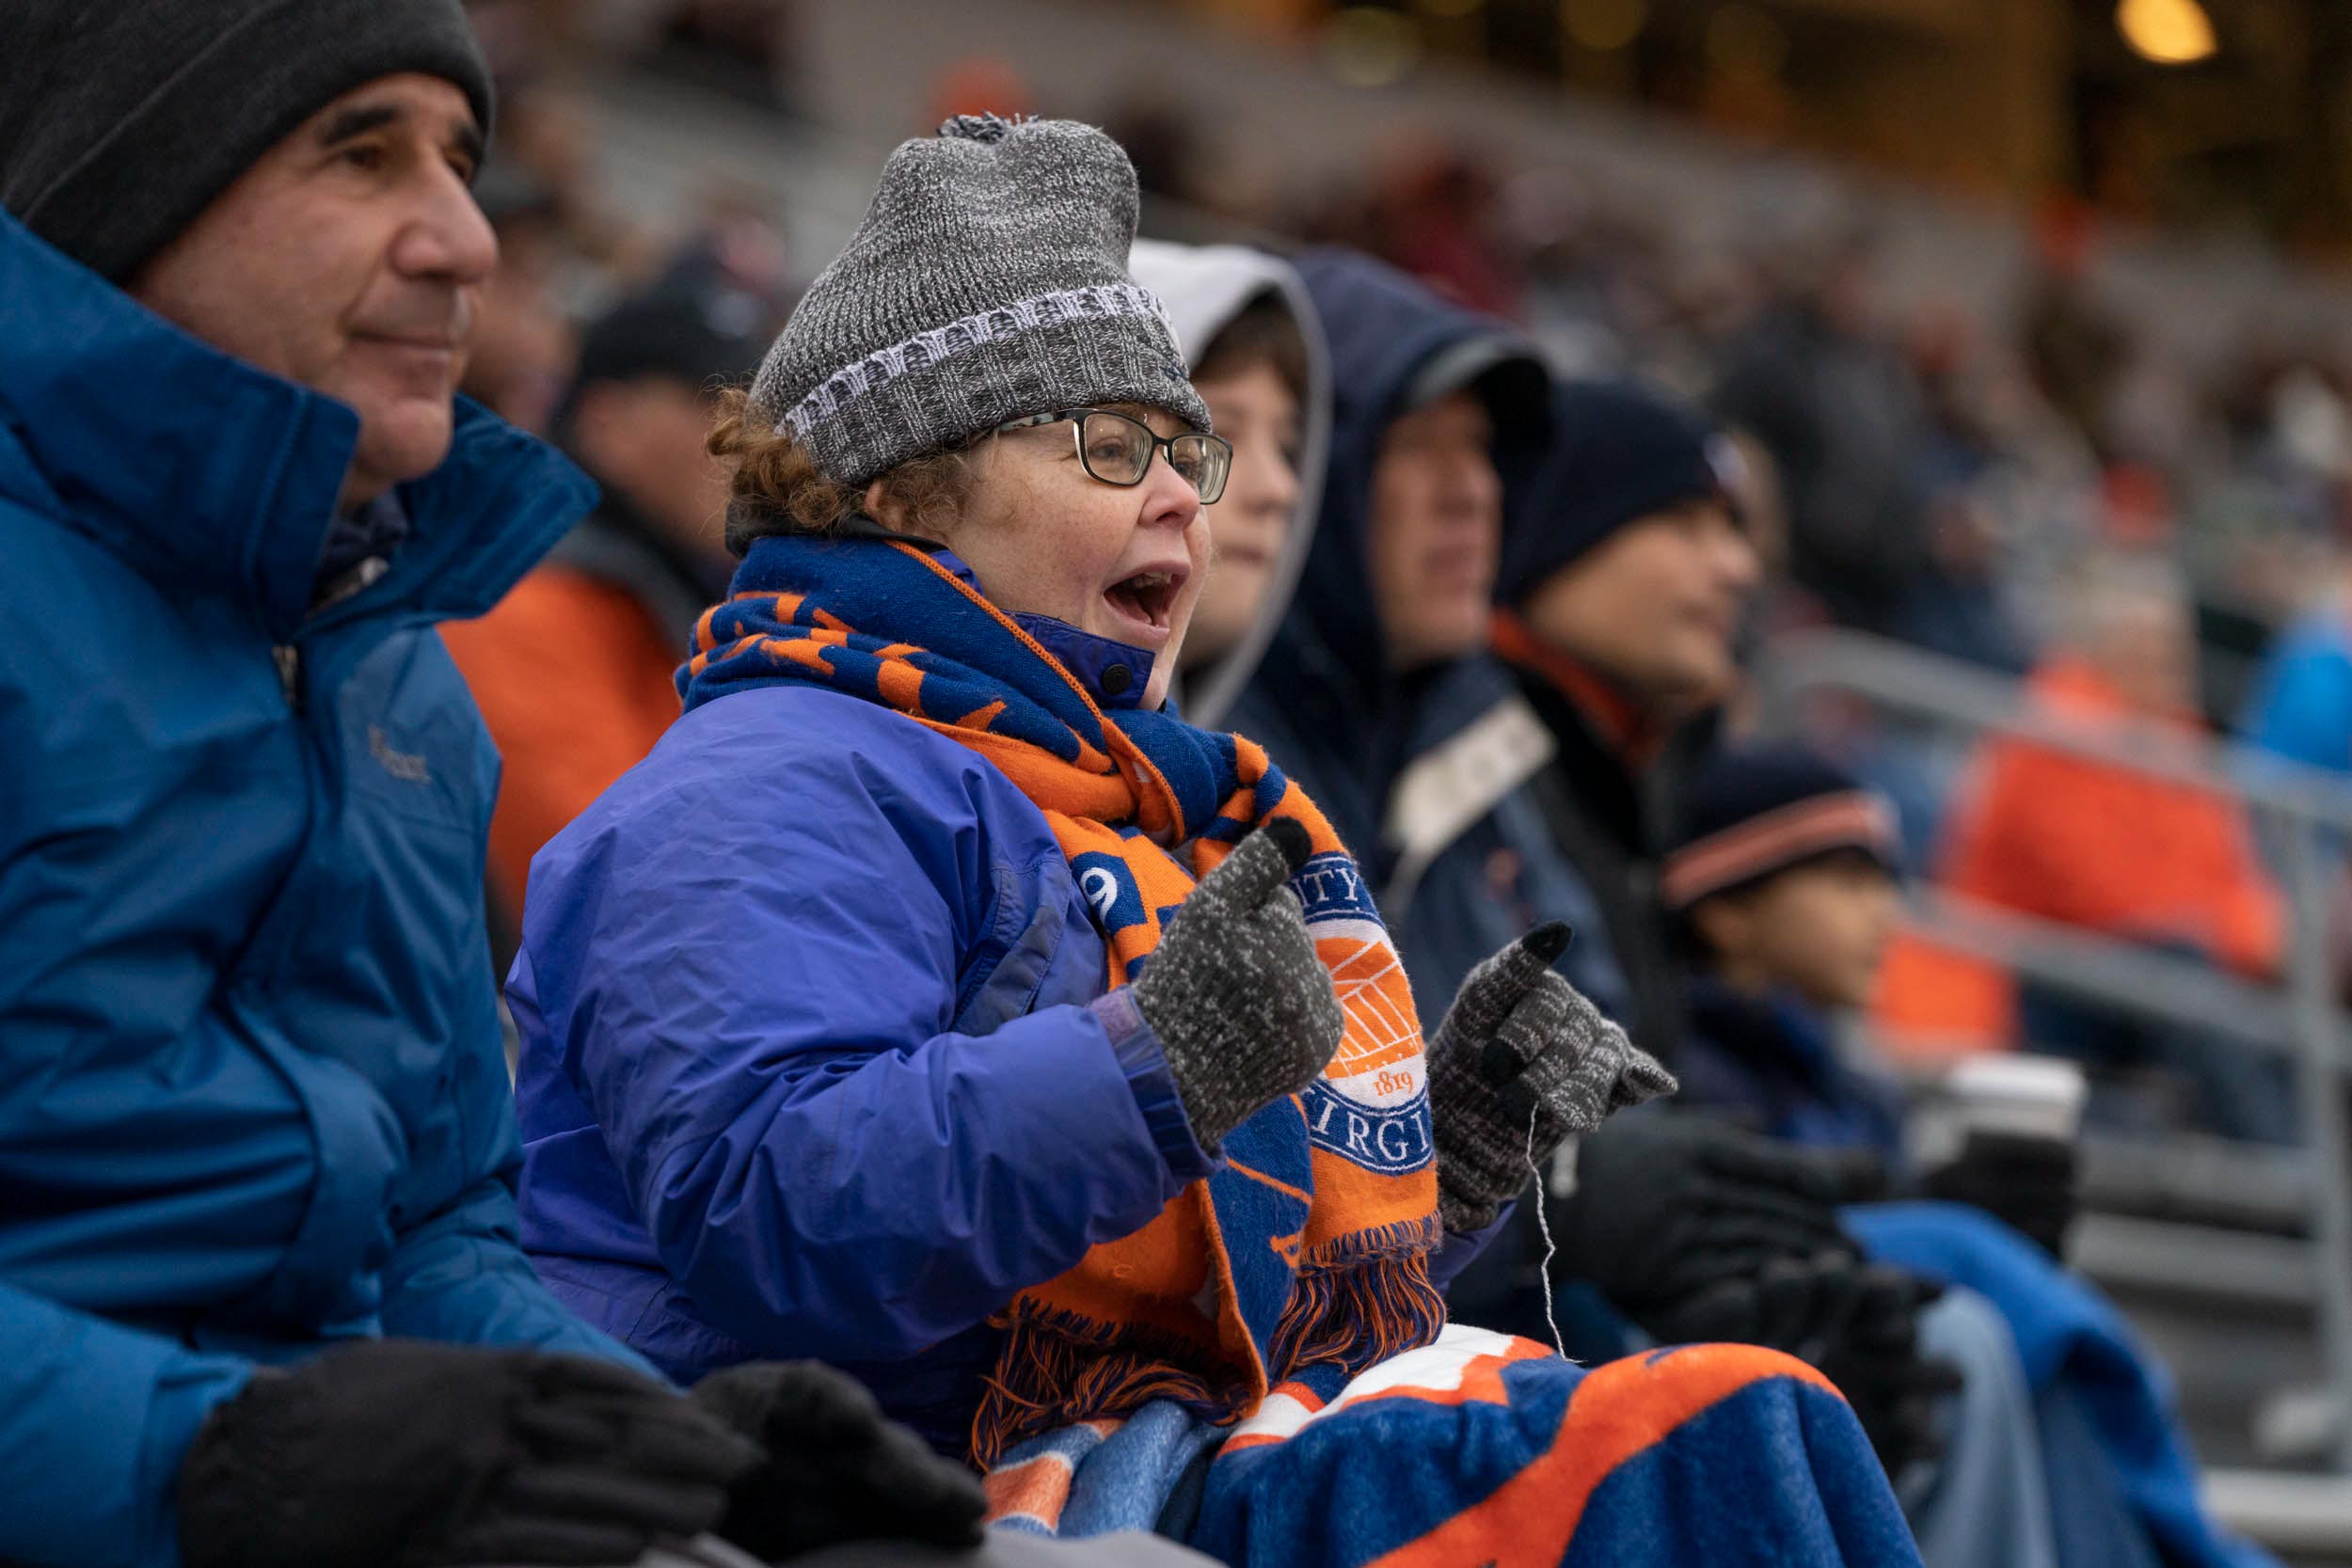 Fans bundled up in warm clothing as they cheer for the football team